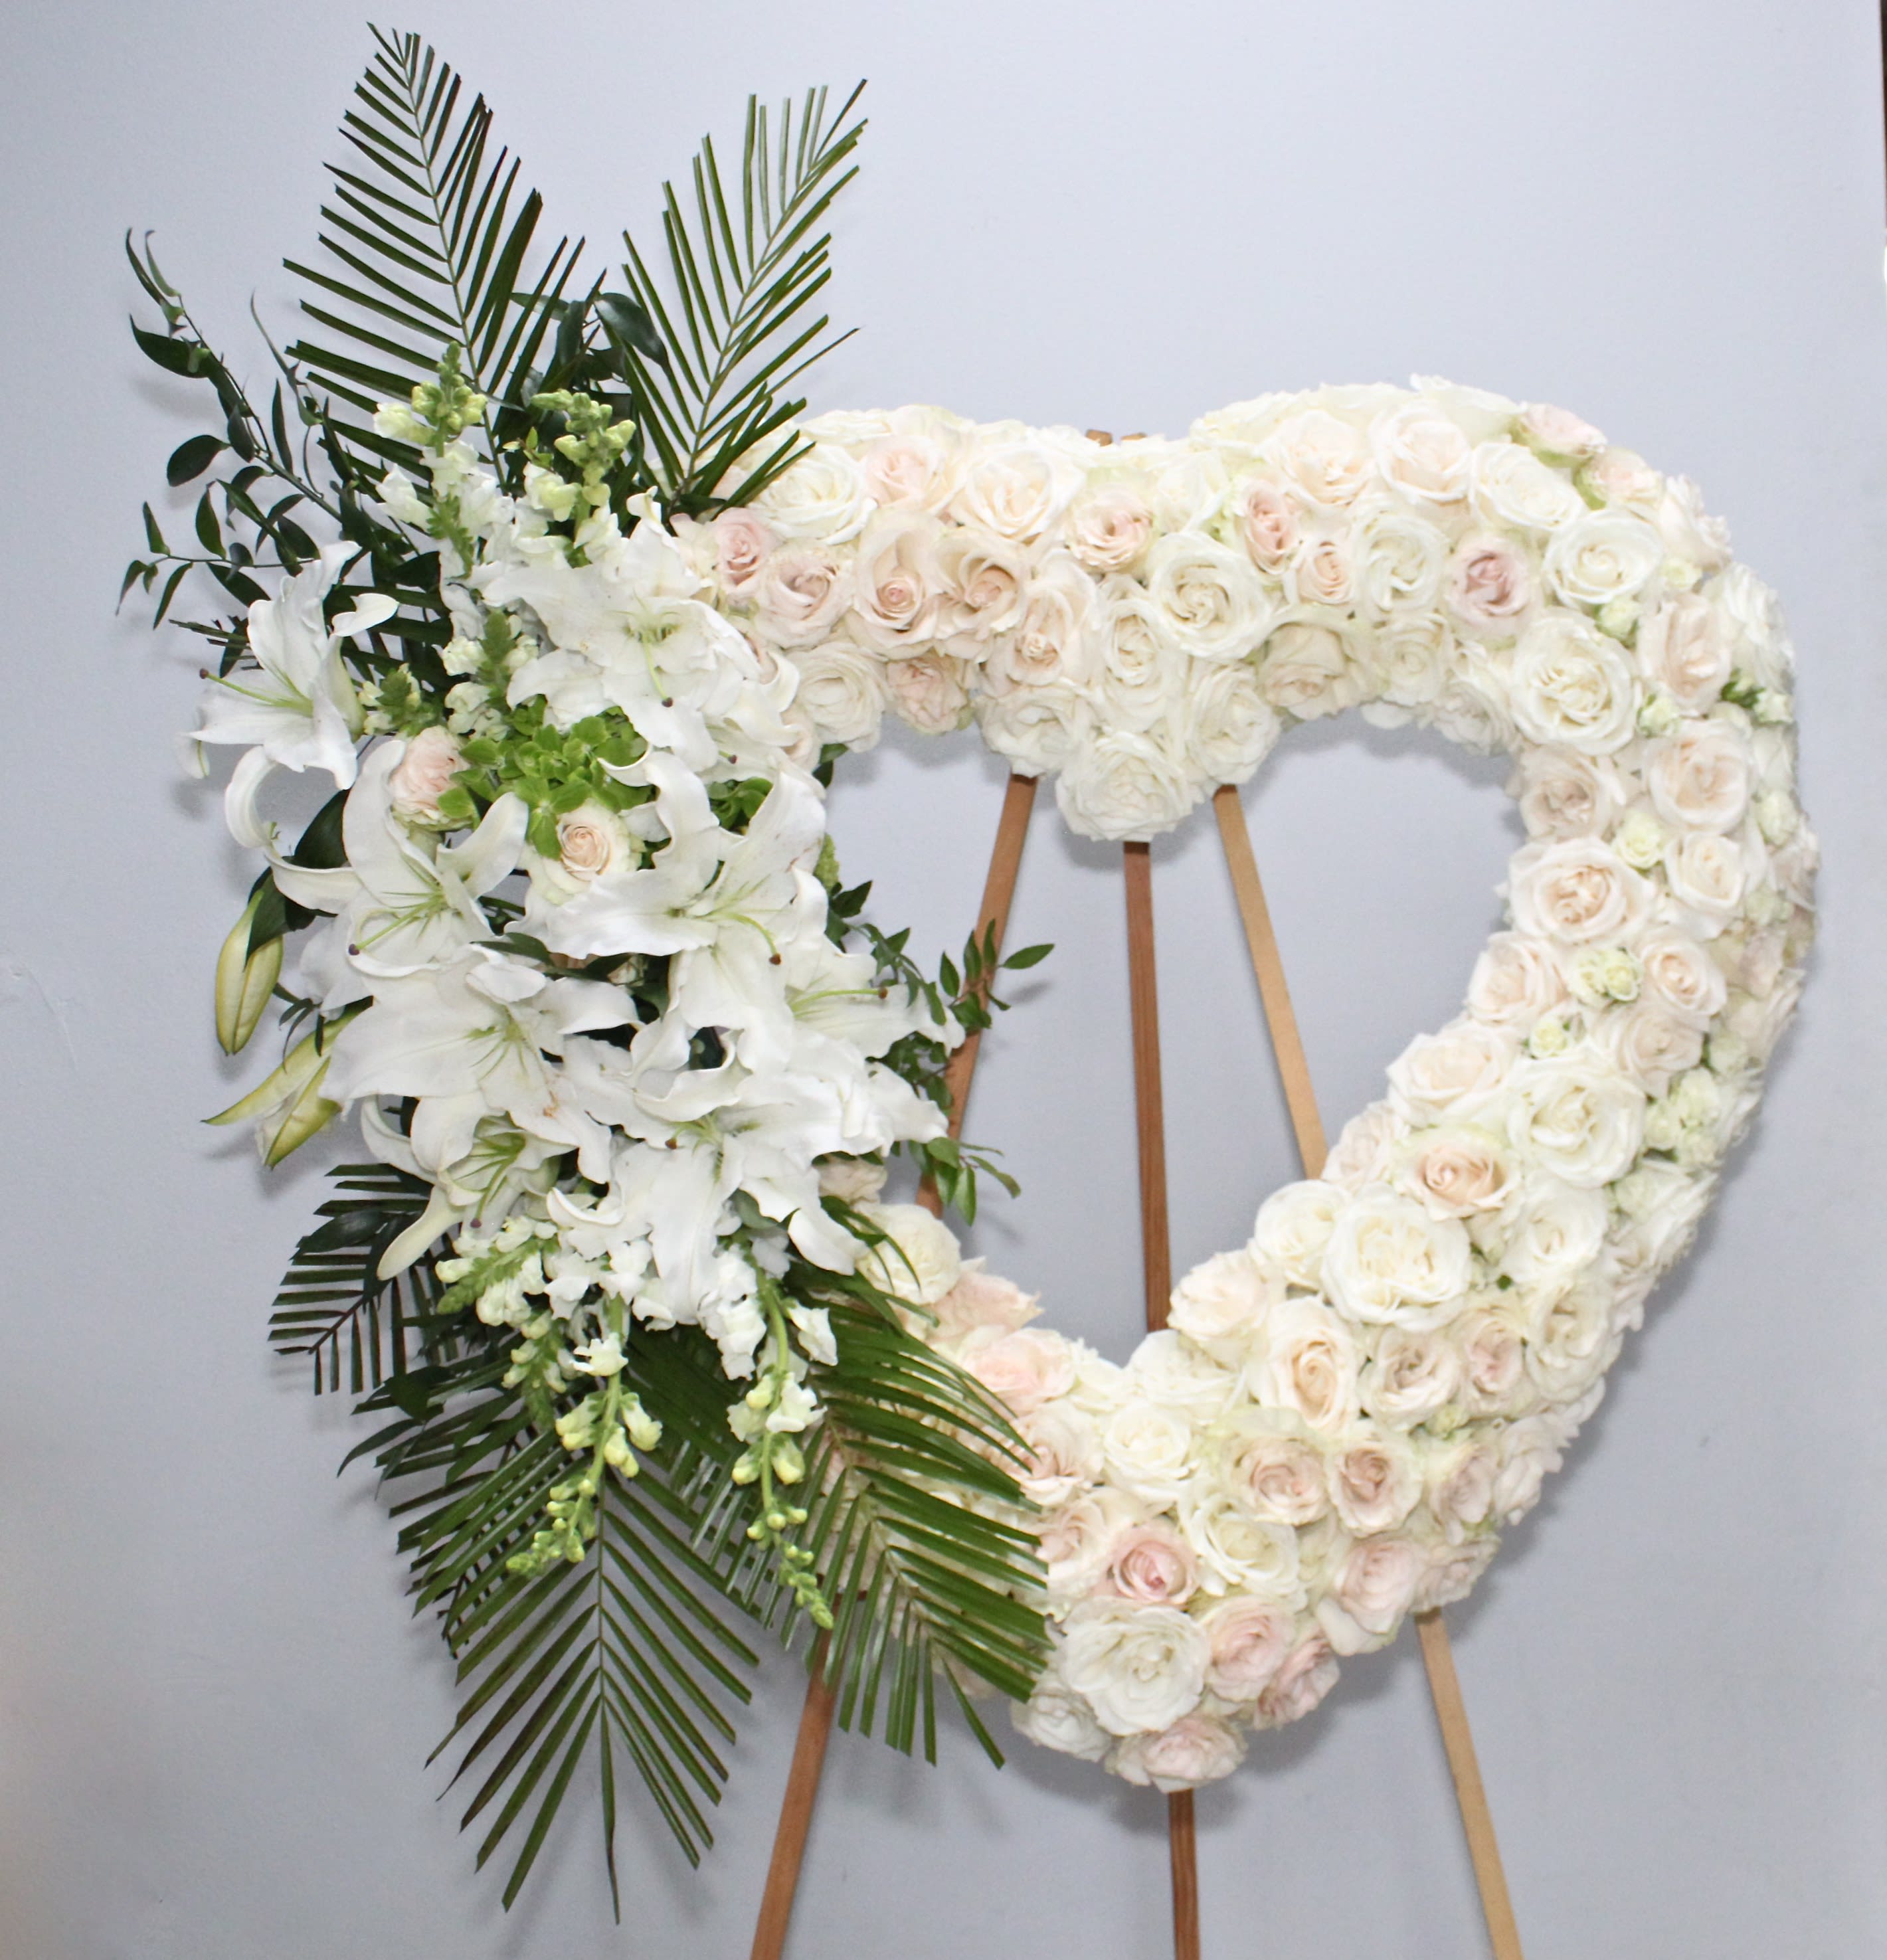 Open Heart with Stargazers  - The white heart is made up of white roses, stargazer lilies and seasonal greens.   We include easel, printed banner and delivery (some fees may apply).  Standard size is 30'', deluxe is 36'', and premium is 42''.